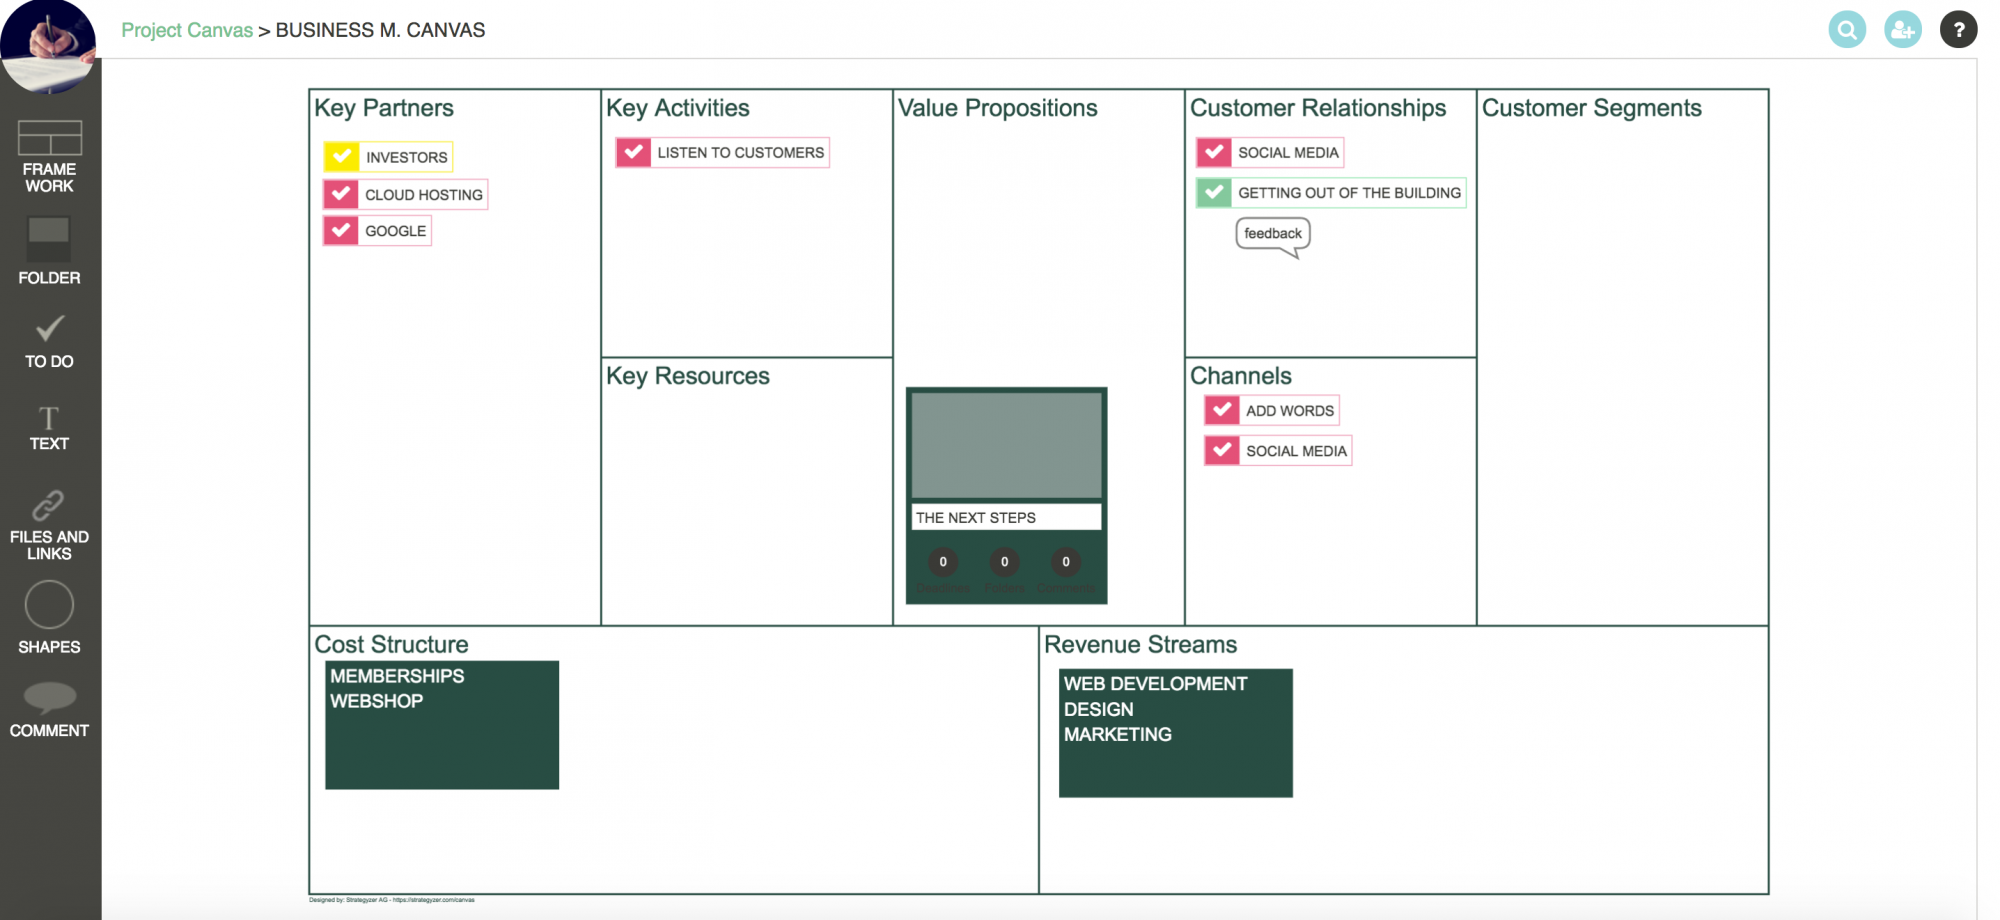 Business model canvas overview